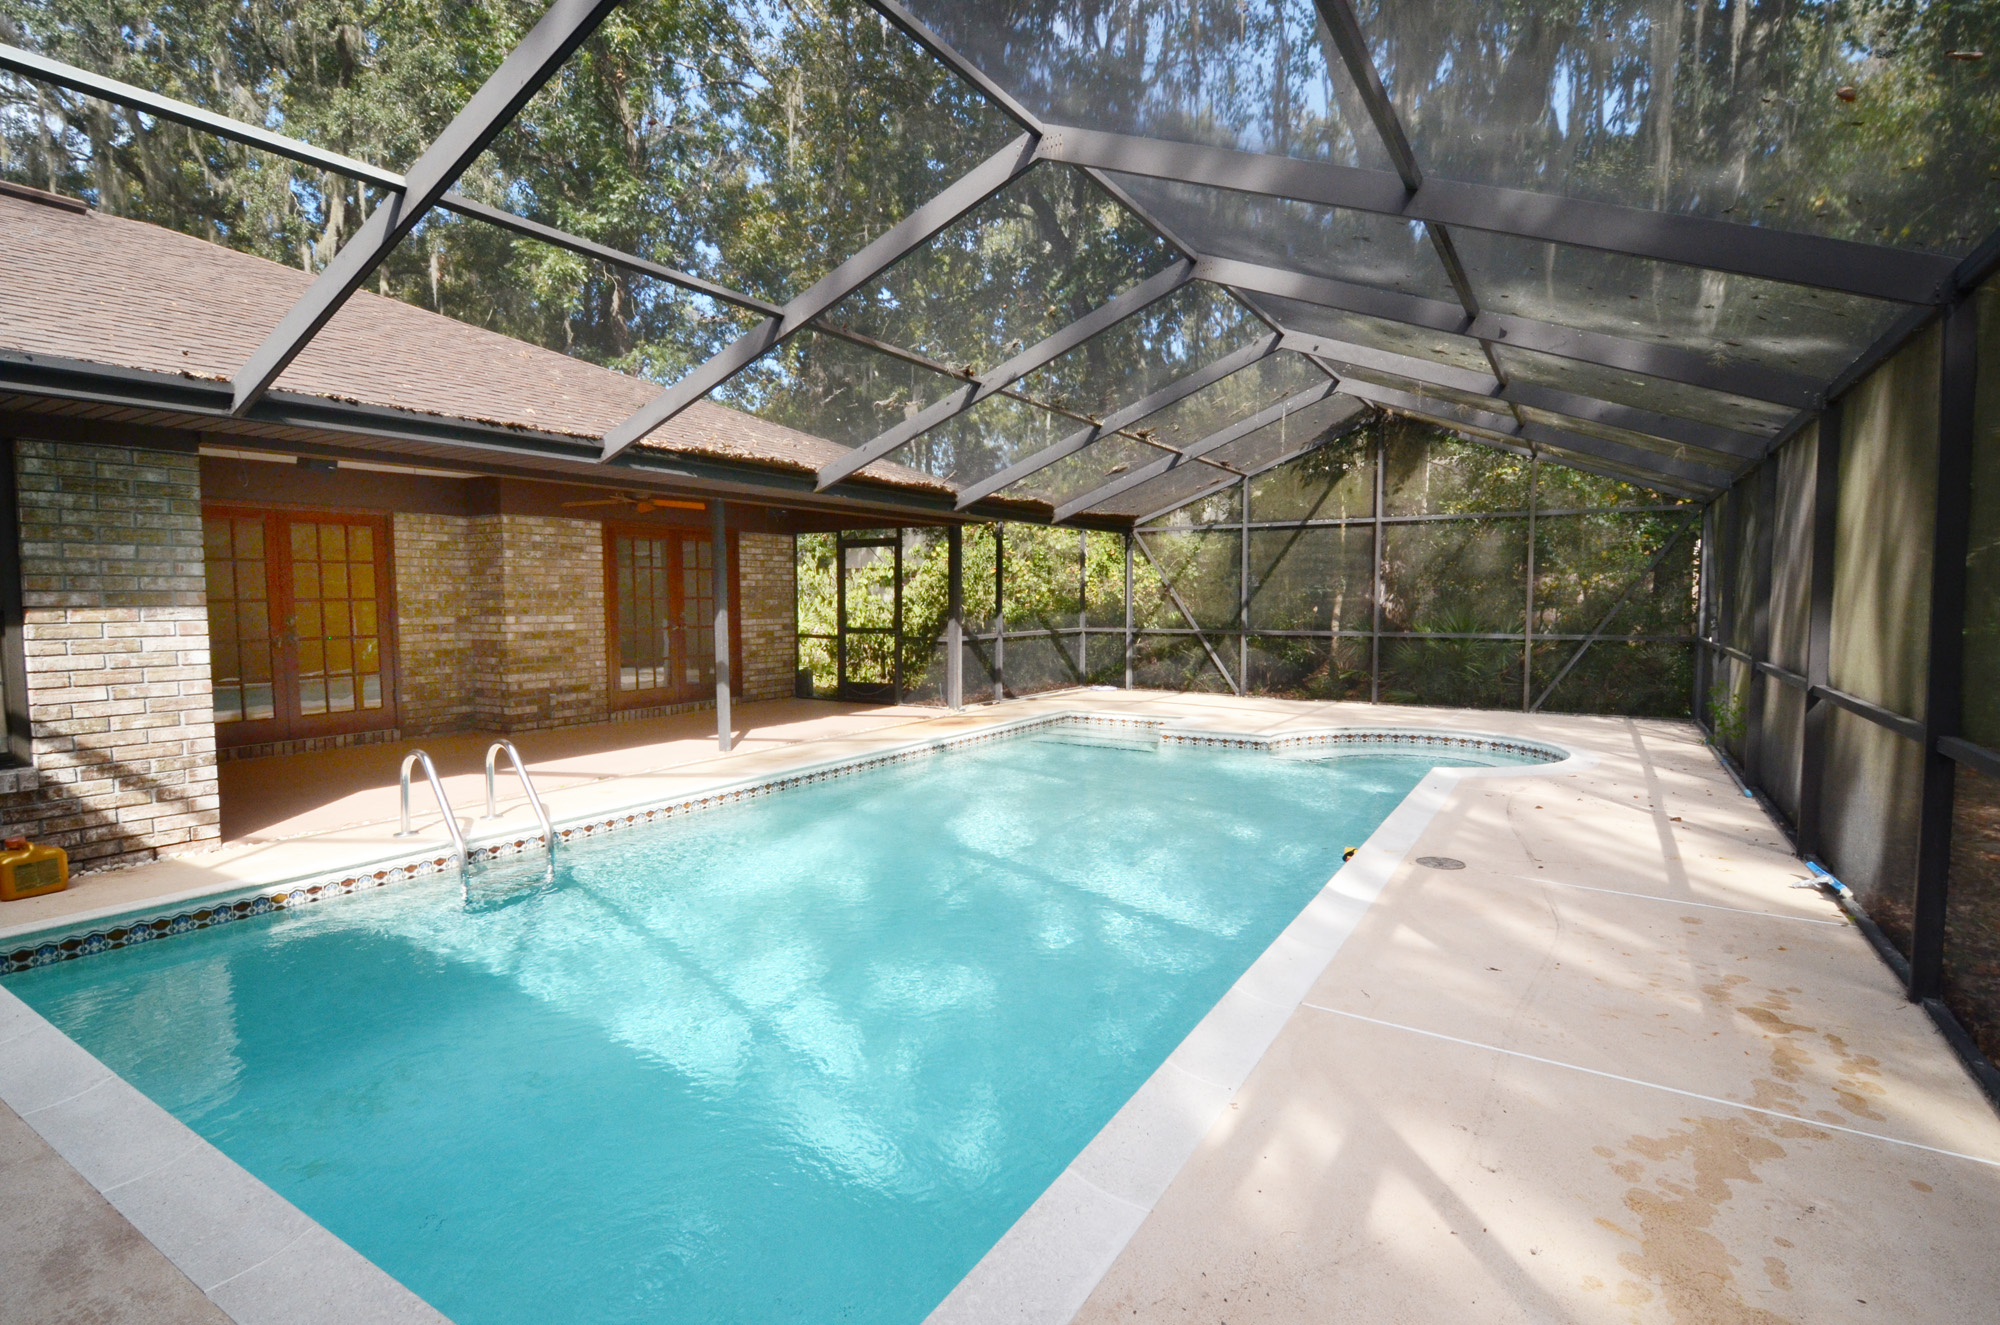 Sold: Pool Home in Hunter’s Glen NW Gainesville